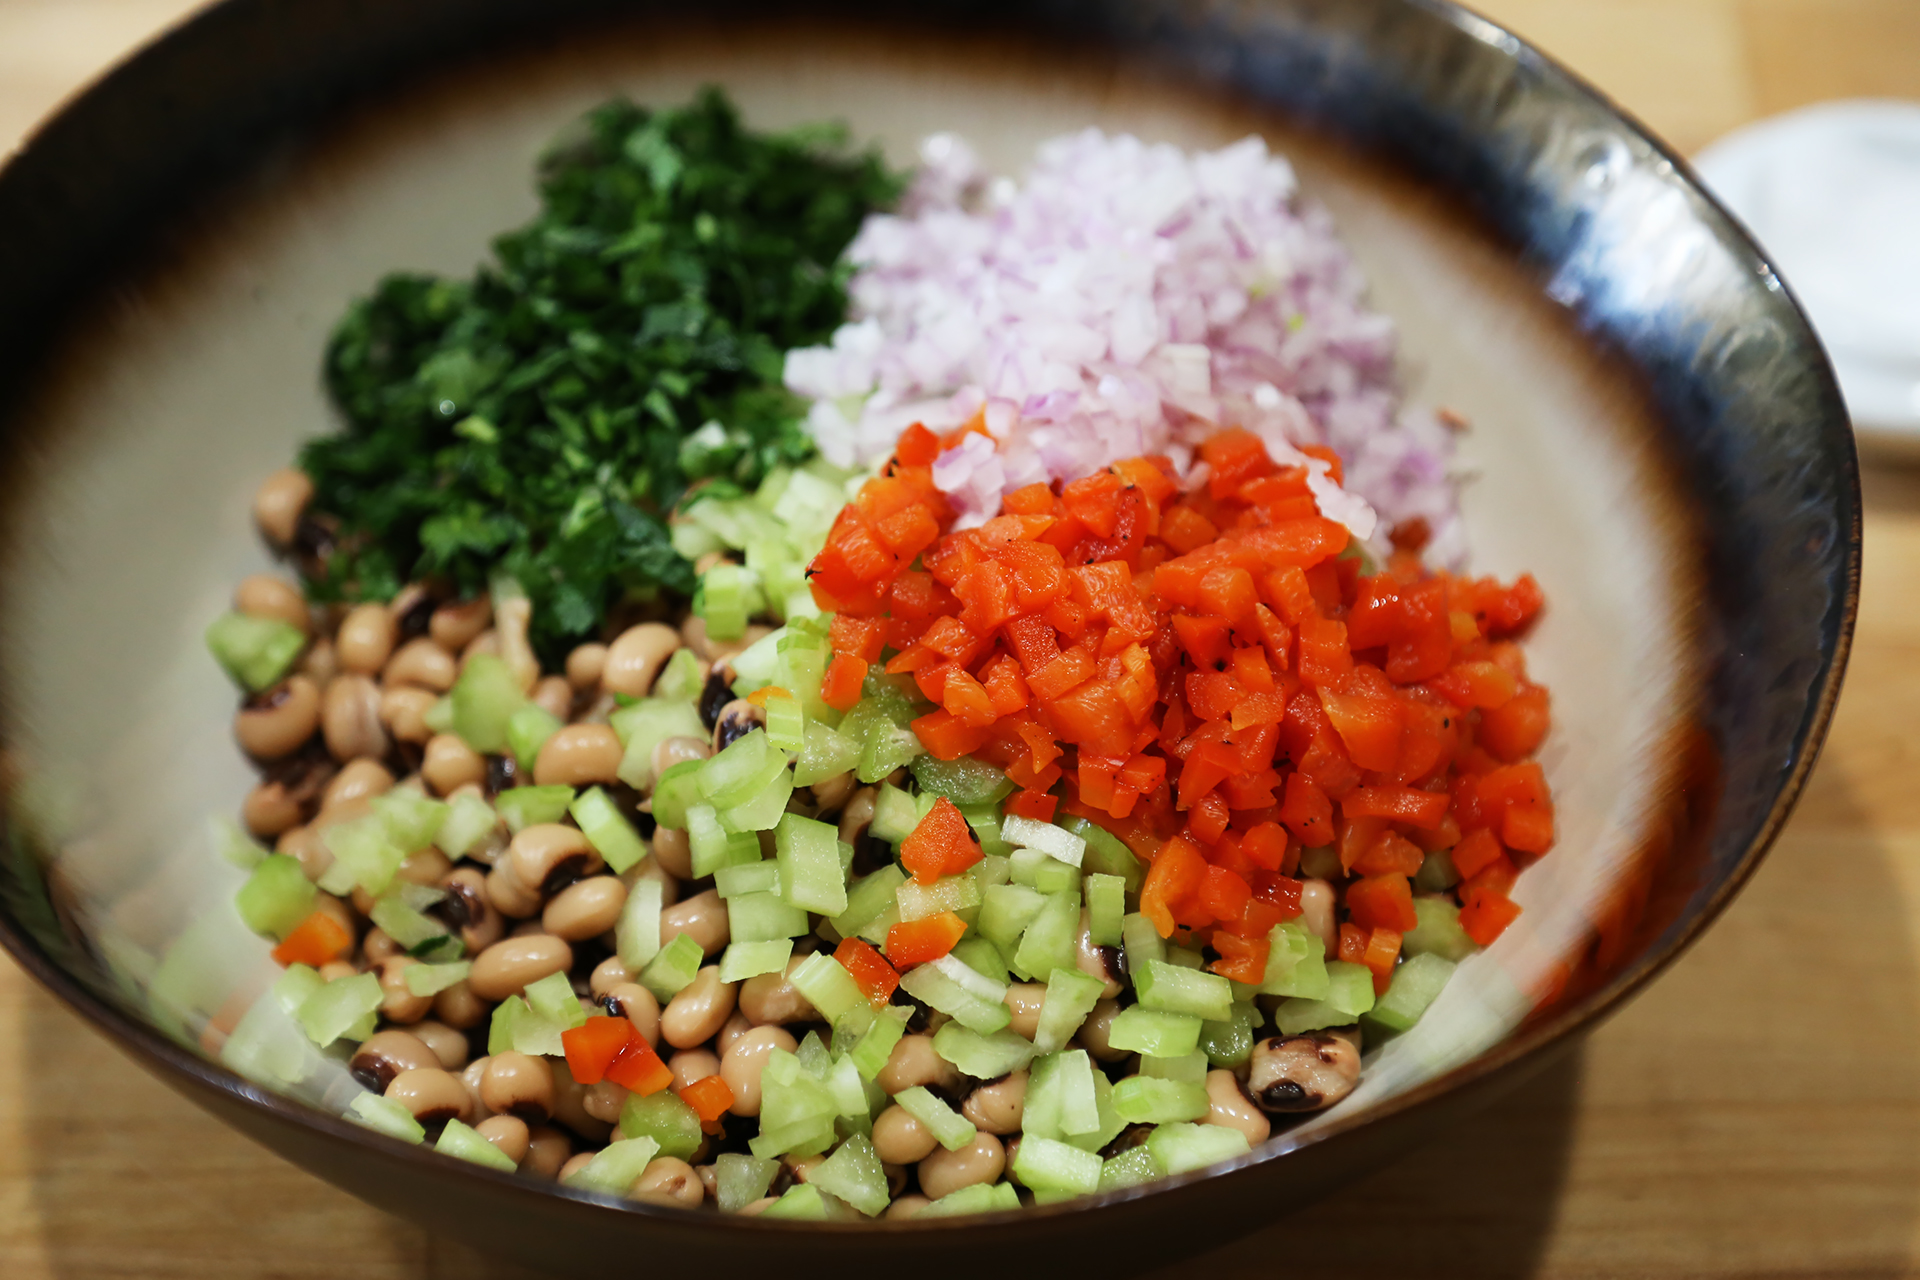 Put the drained and rinsed beans in a large serving bowl. Add the roasted bell pepper, celery, red onion, and parsley.